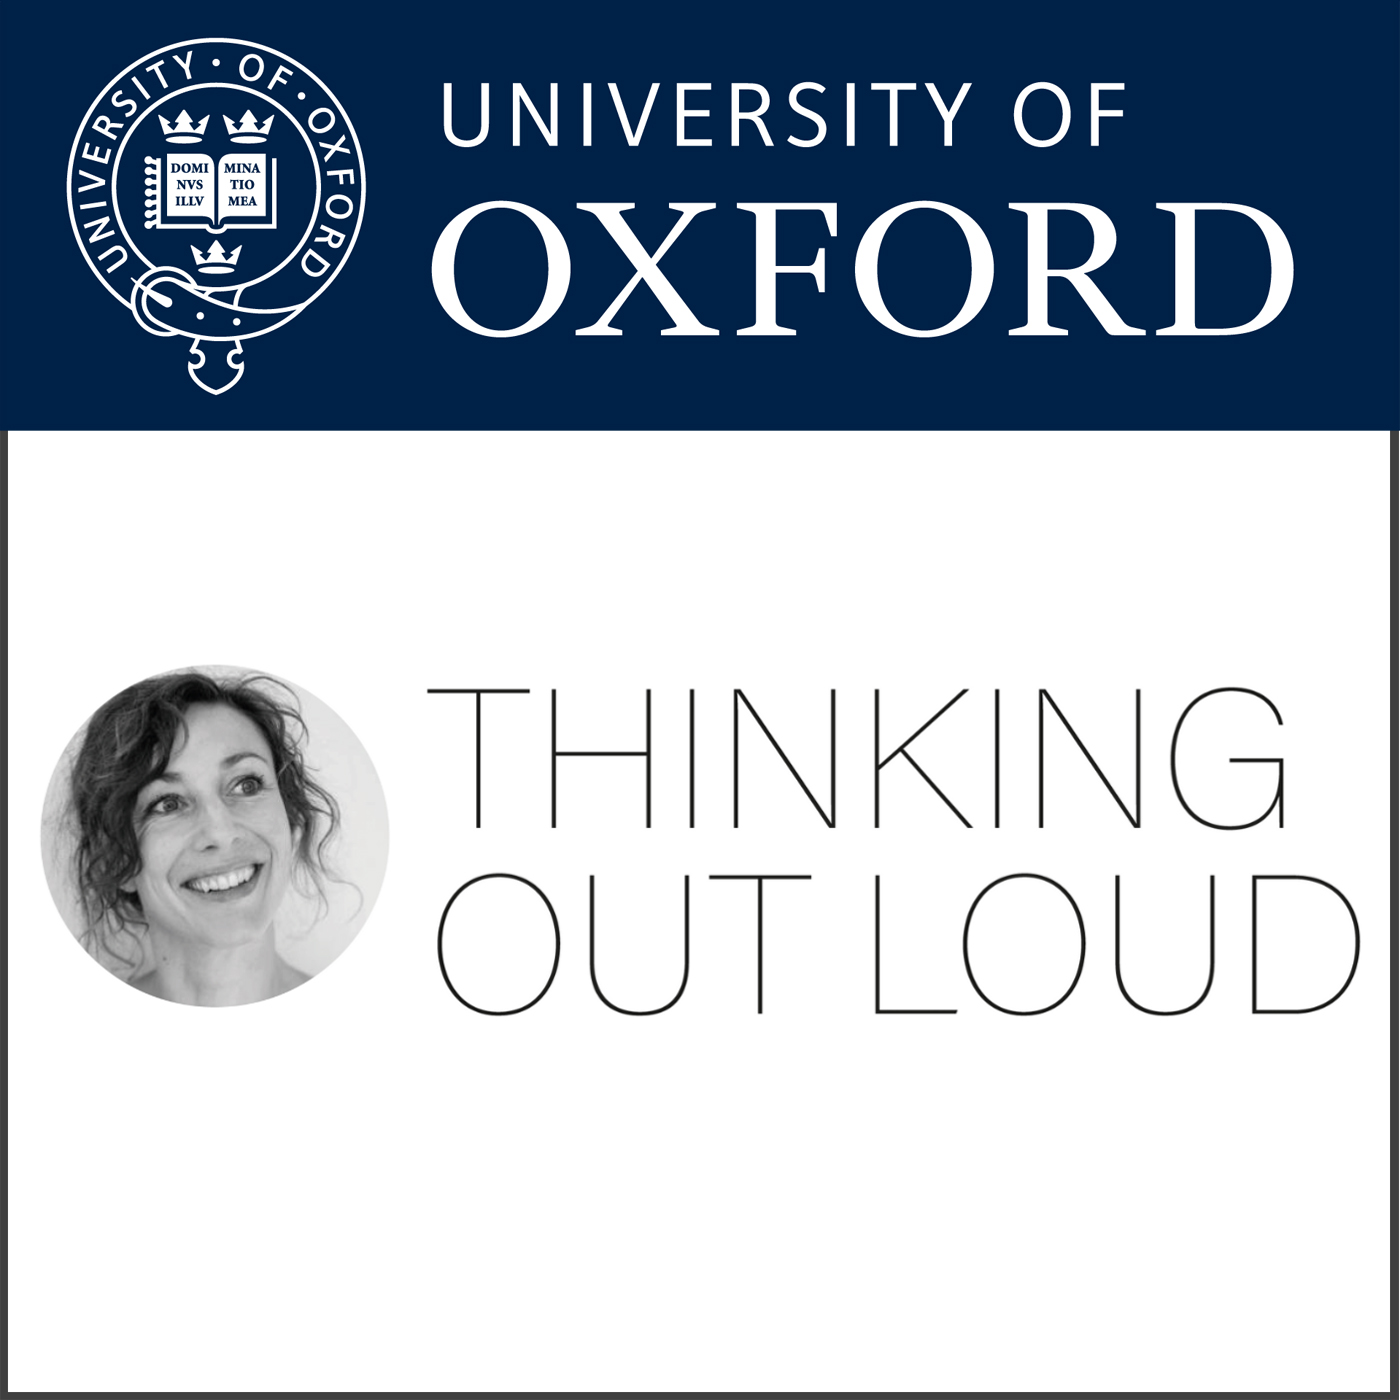 Thinking Out Loud: leading philosophers discuss topical global issues